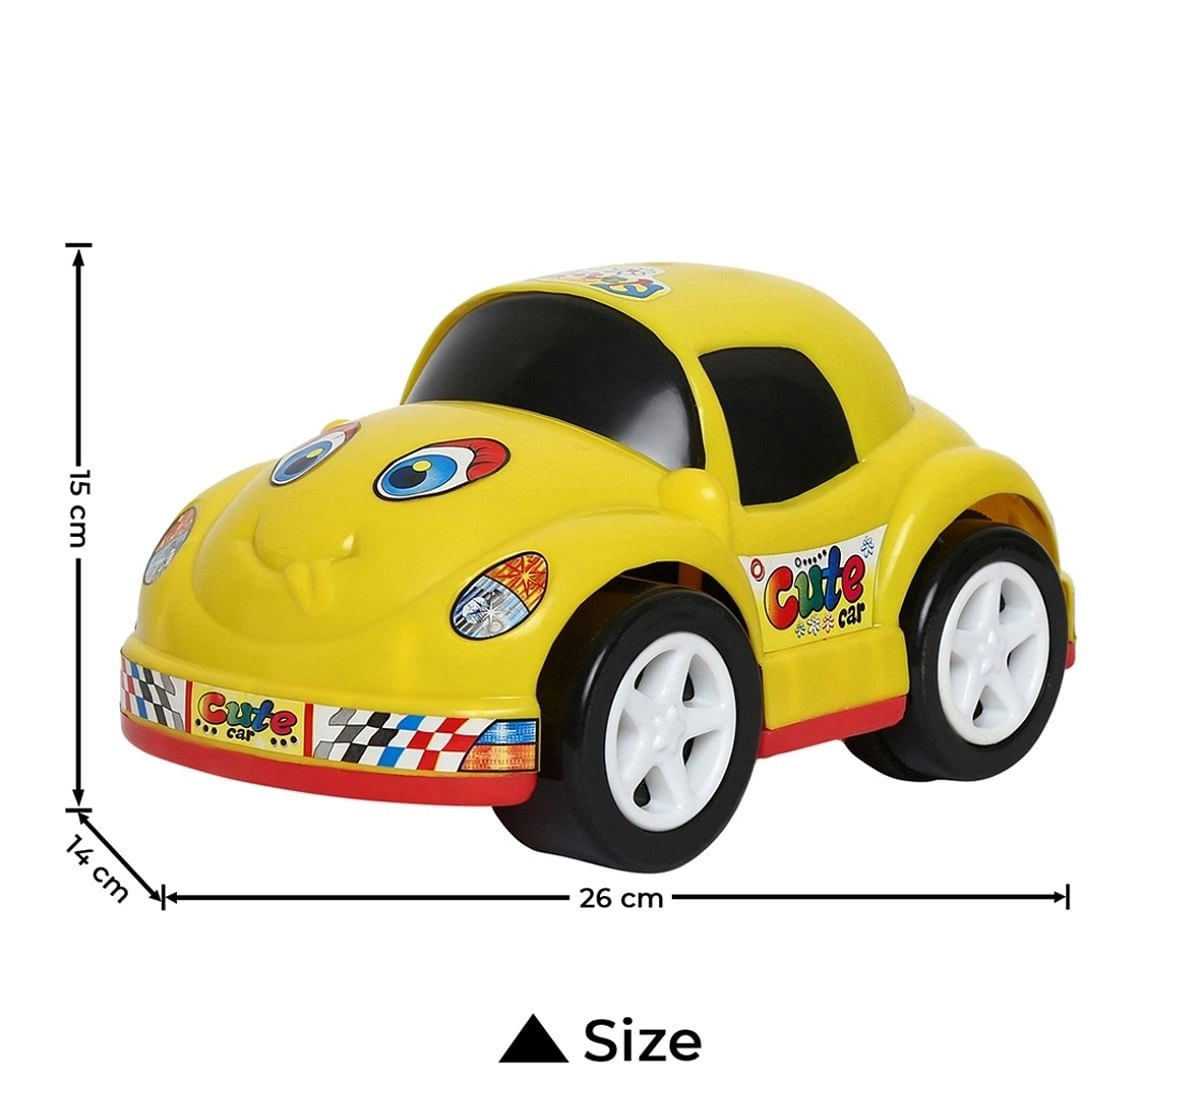 Toyspree Friction Powered Cute Car for Kids, 18M+ (Multicolor)